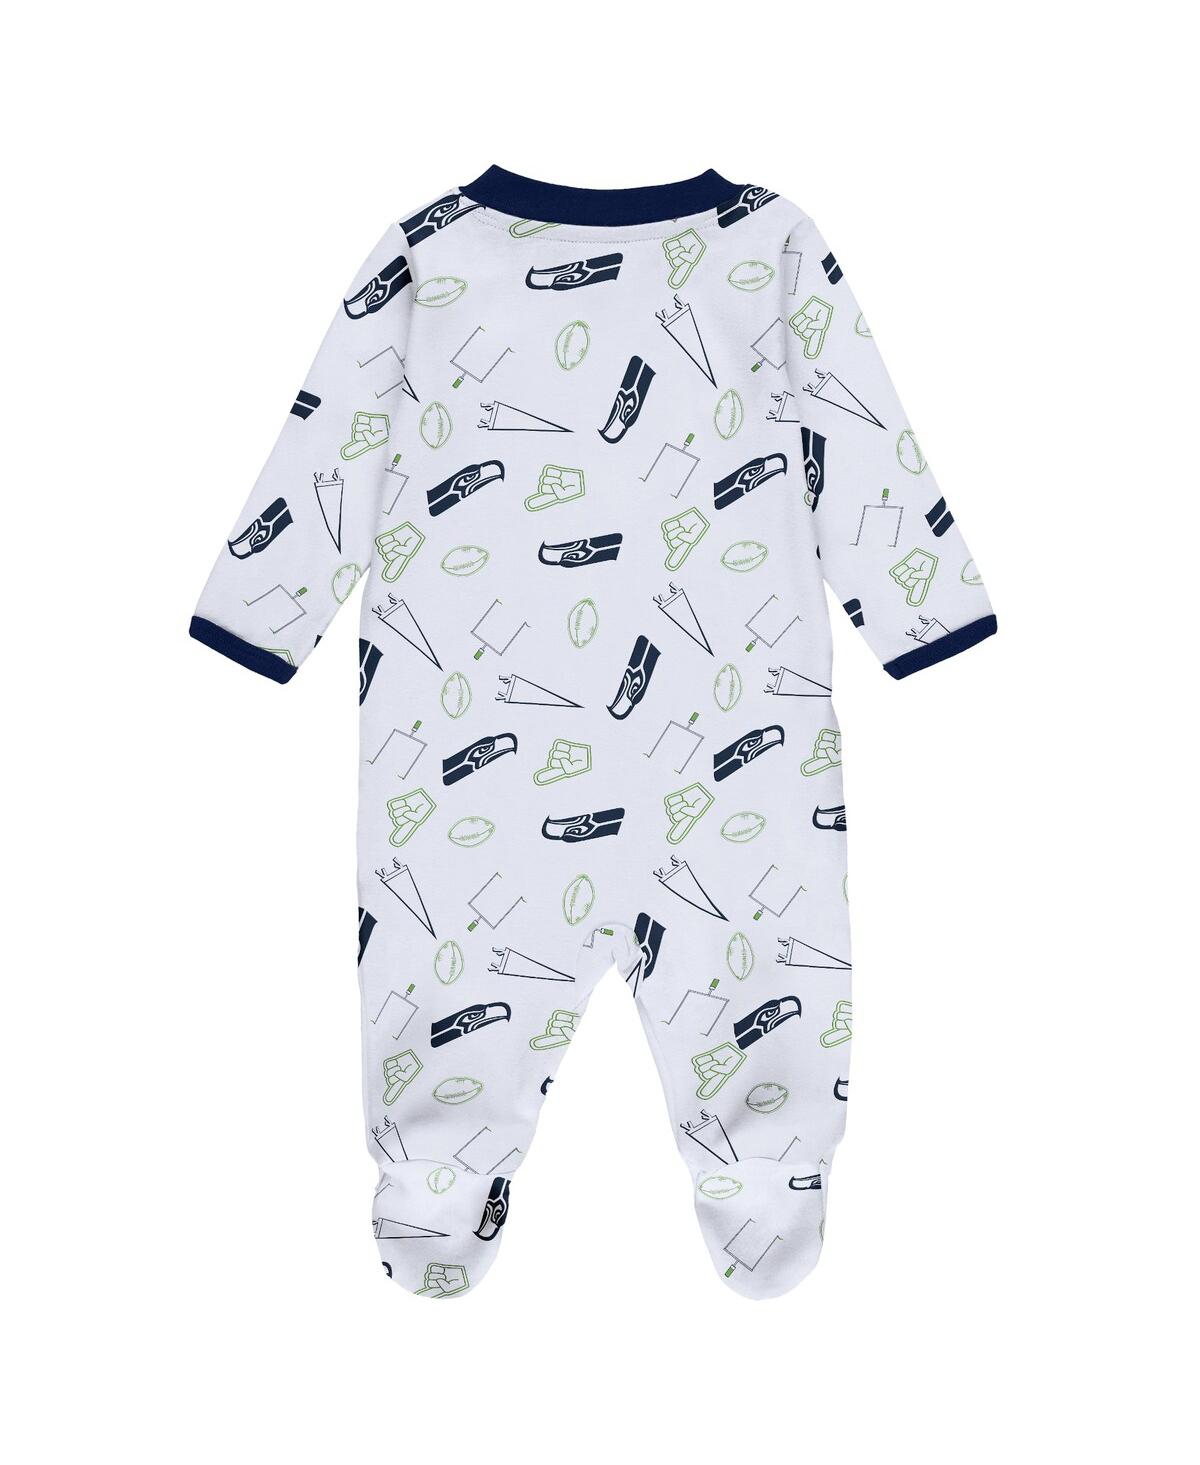 Shop Wear By Erin Andrews Baby Boys And Girls  White Seattle Seahawks Sleep And Play Full-zip Sleeper And